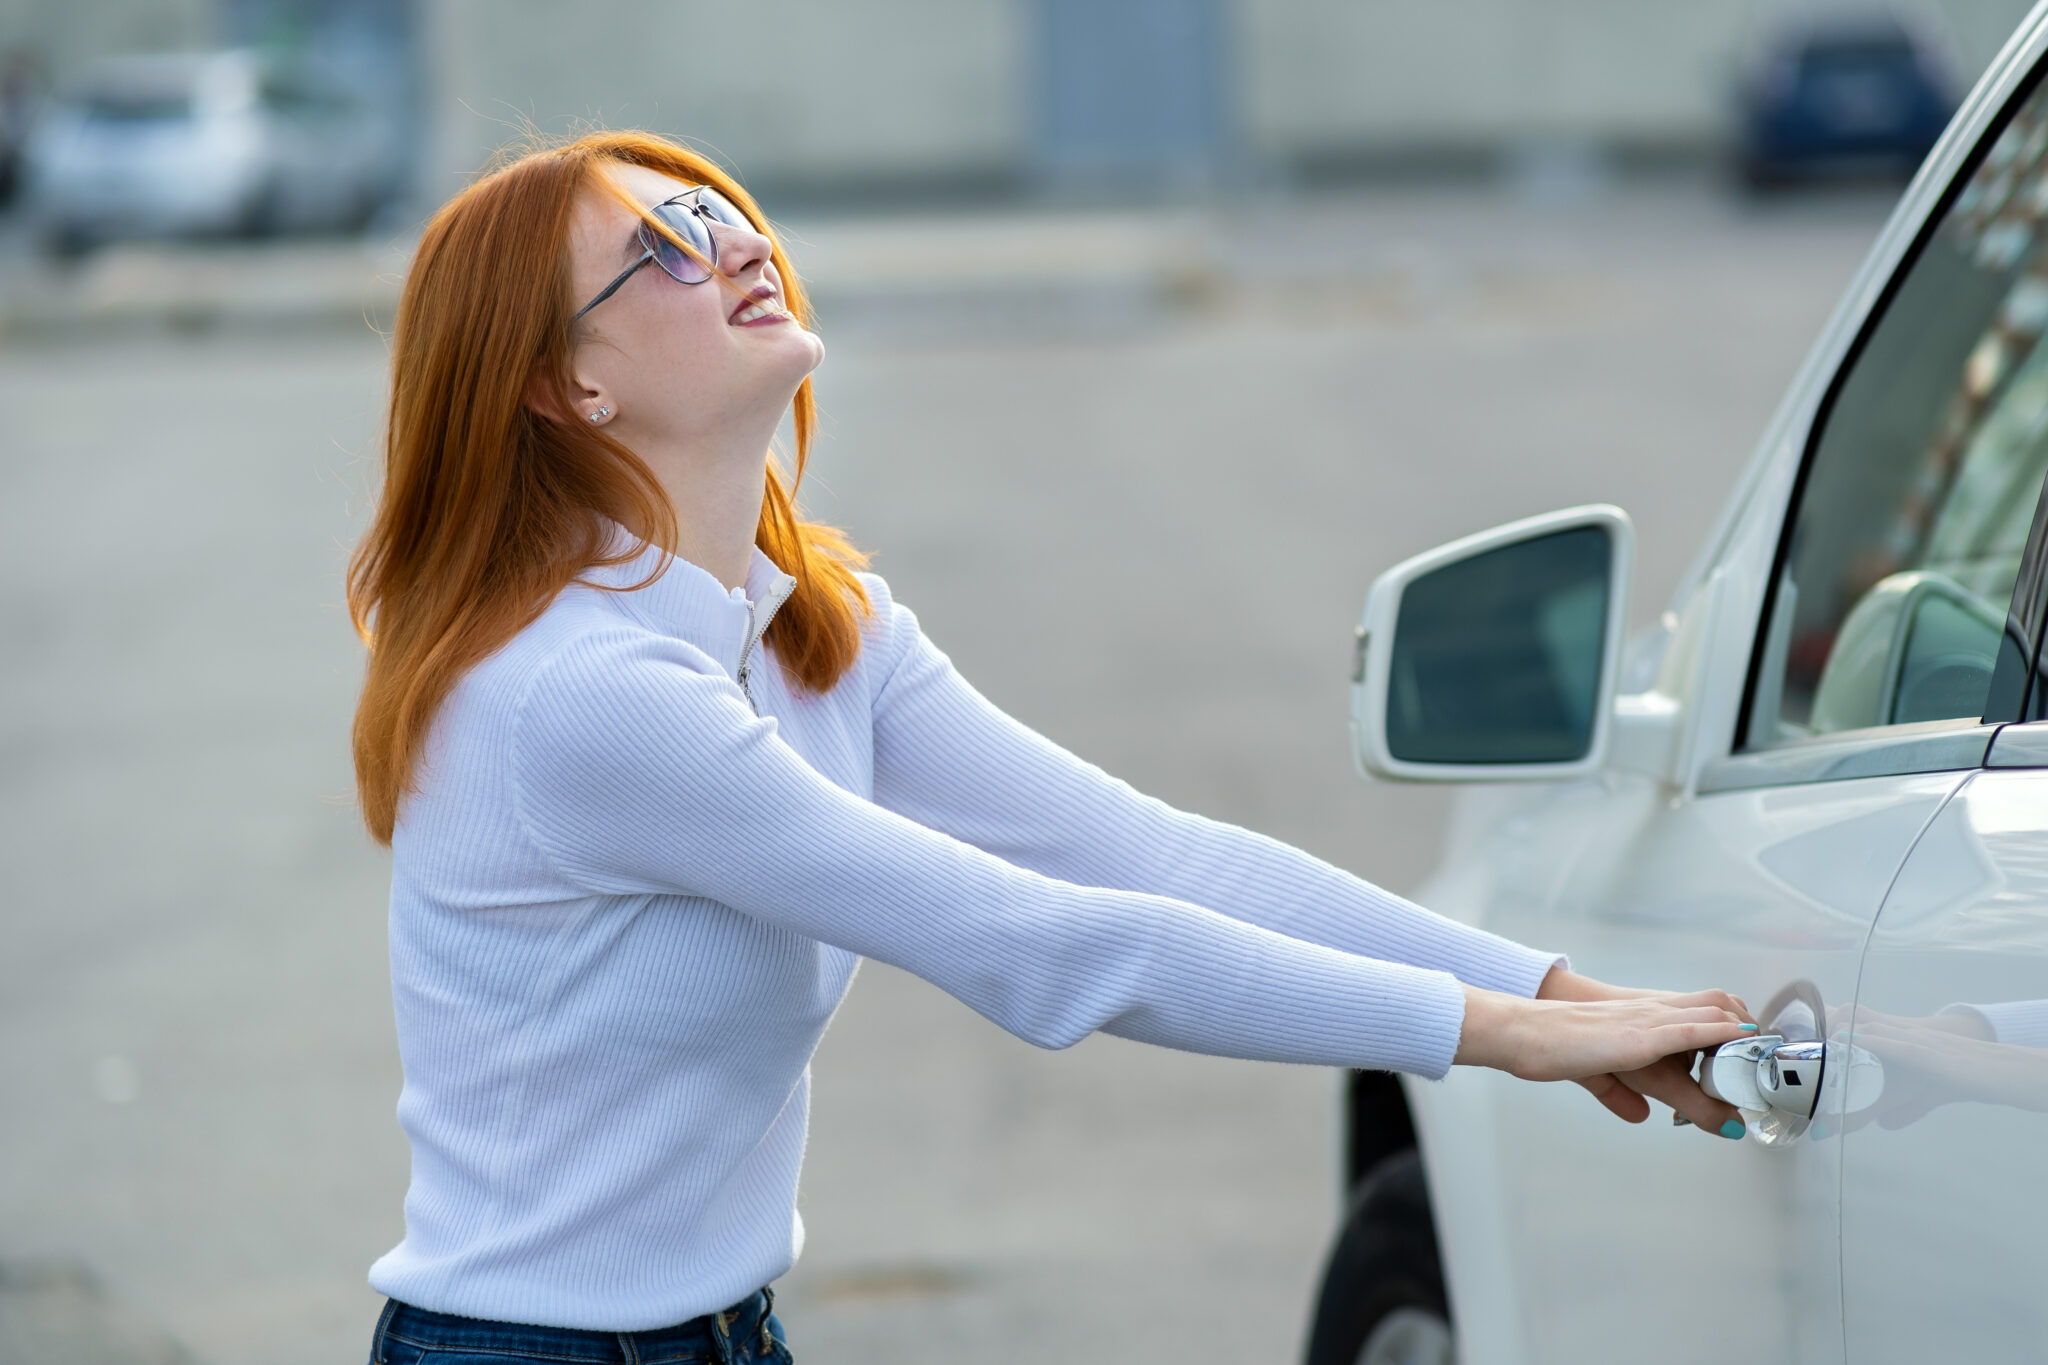 A woman trying to open closed car doors